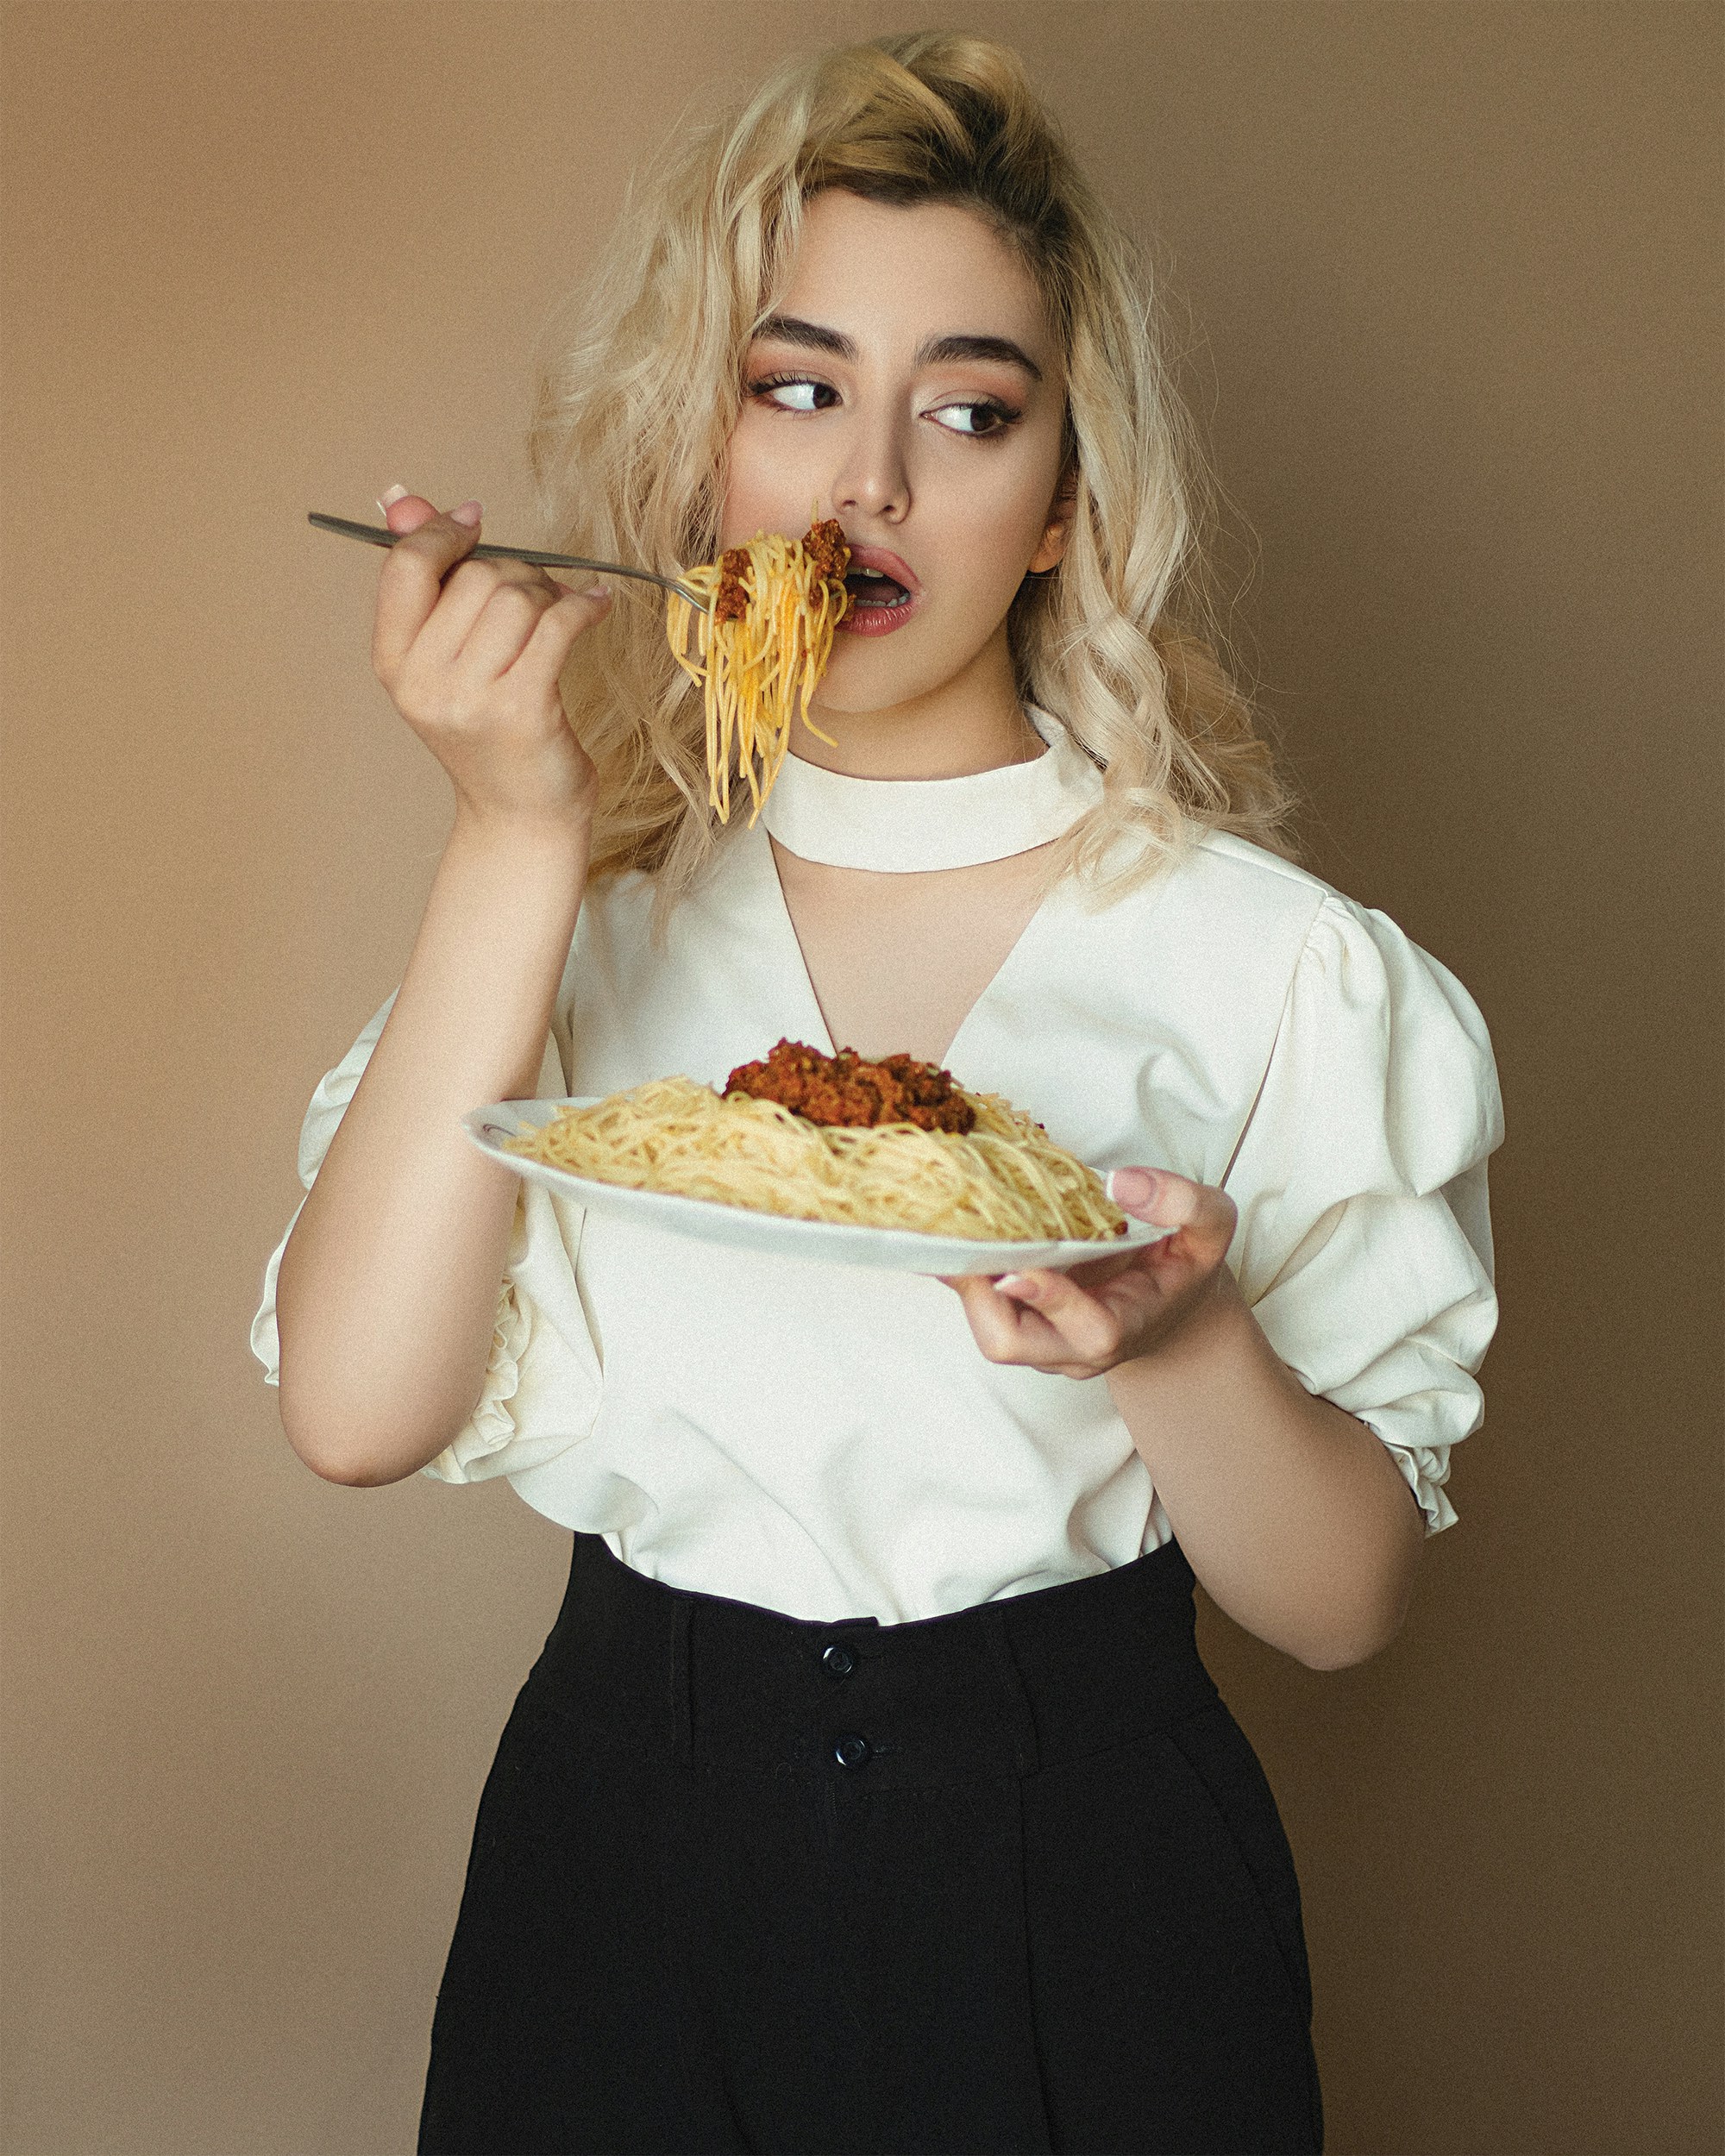 great photo recipe,how to photograph woman in white long sleeve shirt holding fork and eating pizza